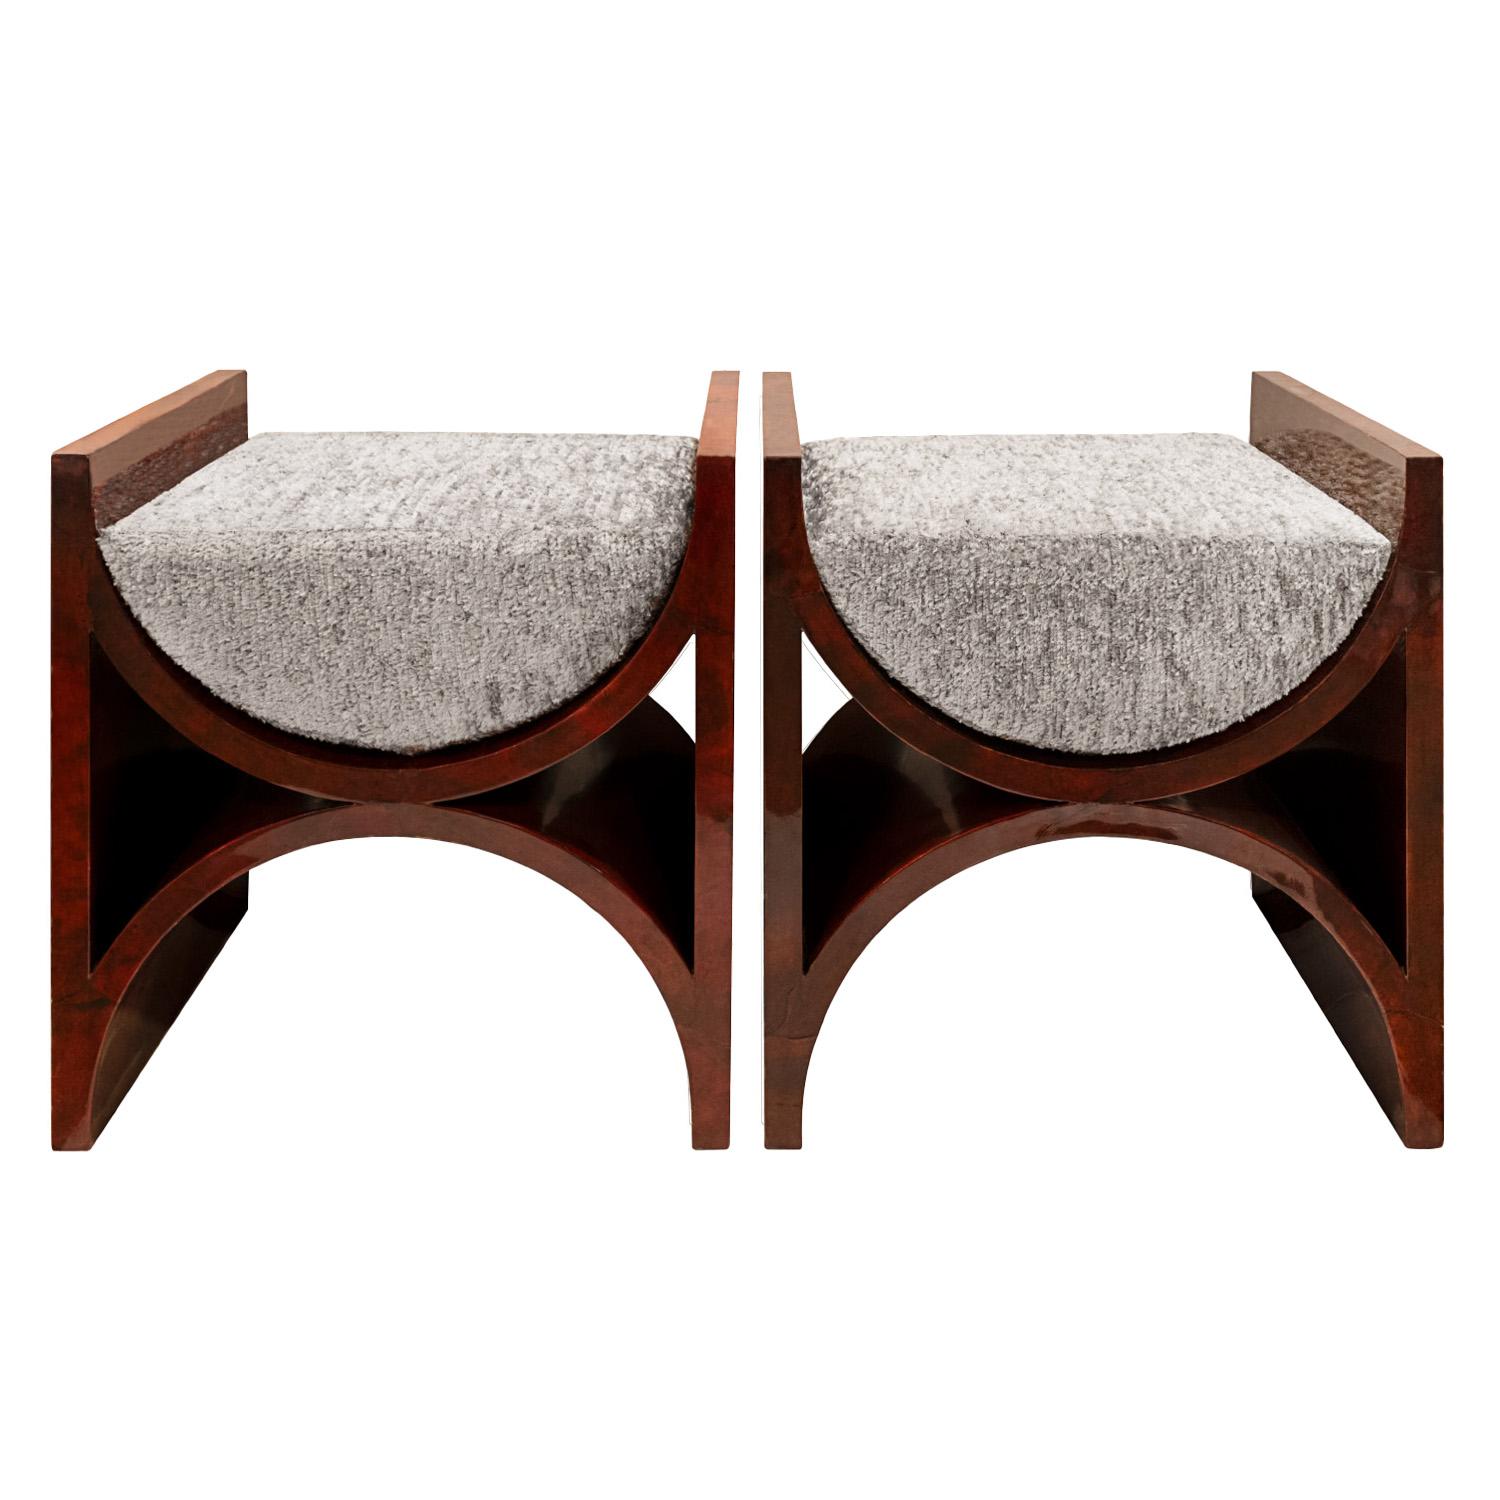 Pair of rare sculptural “J.M.F. Benches” in oxblood lacquered goatskin with seat cushions by Karl Springer, American 1970's.  These exquisite benches are stunning in every way.  Newly reupholstered by Lobel Modern.

Reference:
Karl Springer LTD